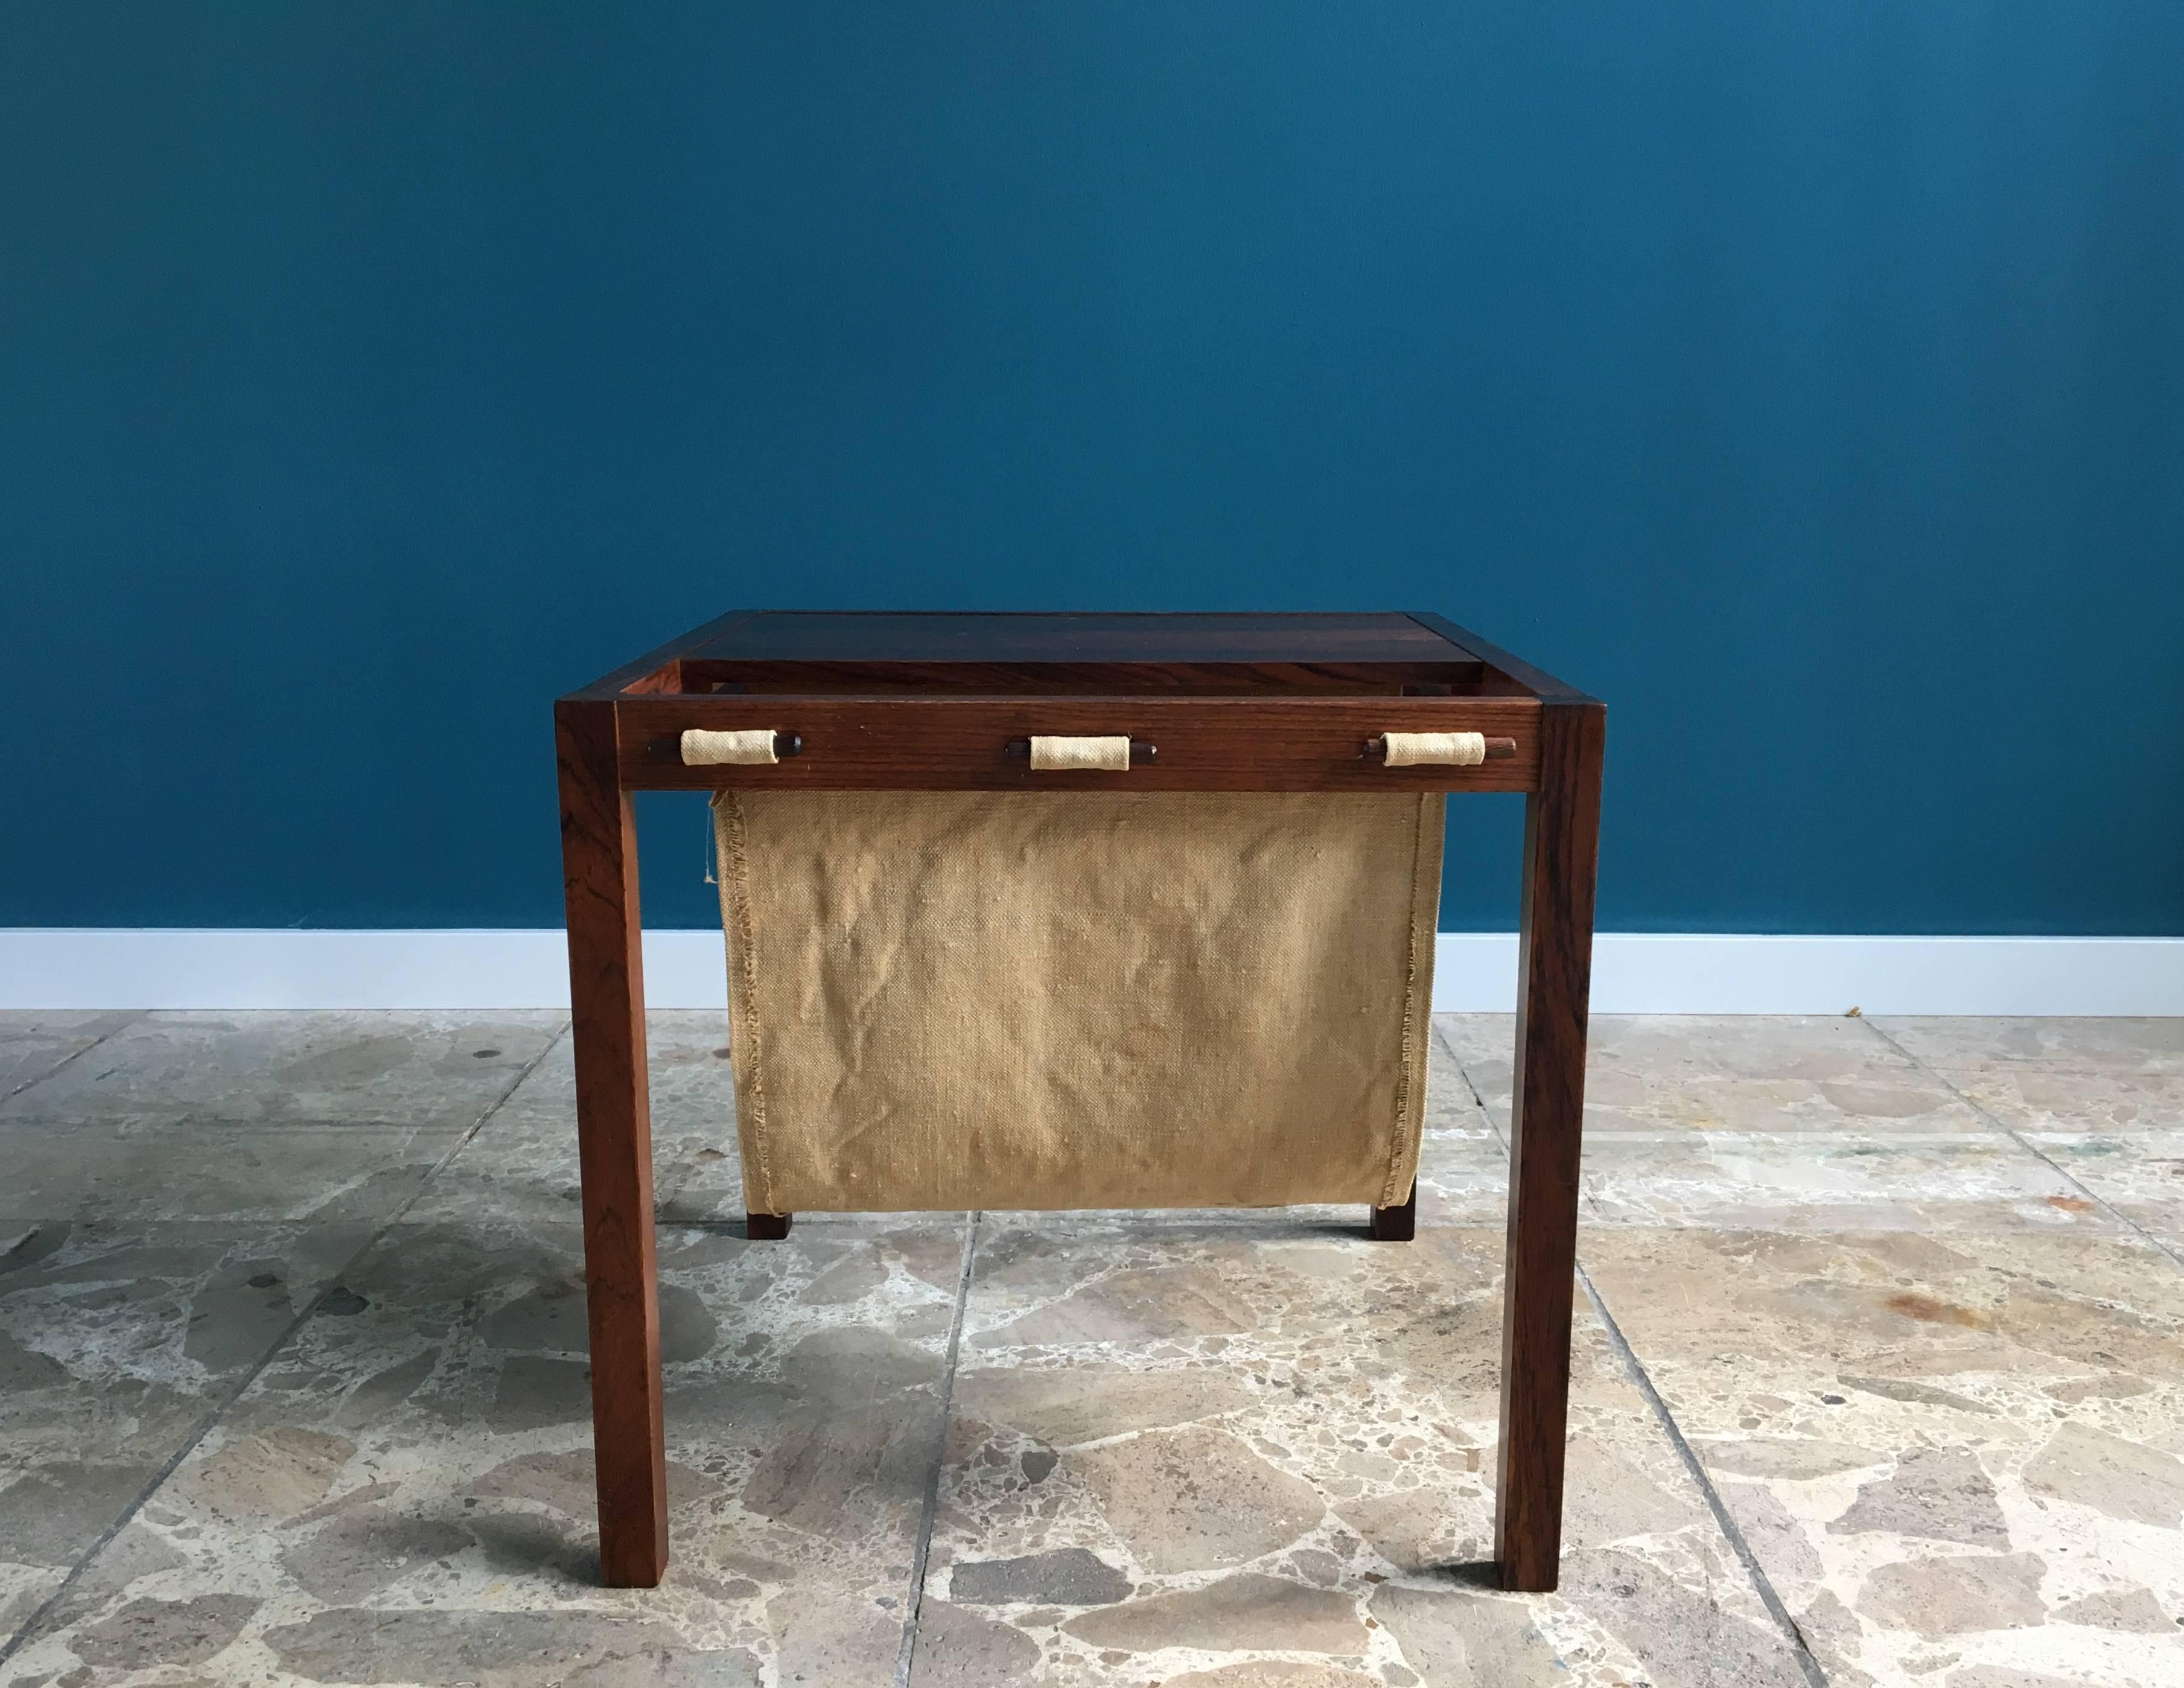 This square side table was made in Denmark in the 1960s and is made of rosewood. Solid construction with canvas used in a sling form to hold magazines and other articles.